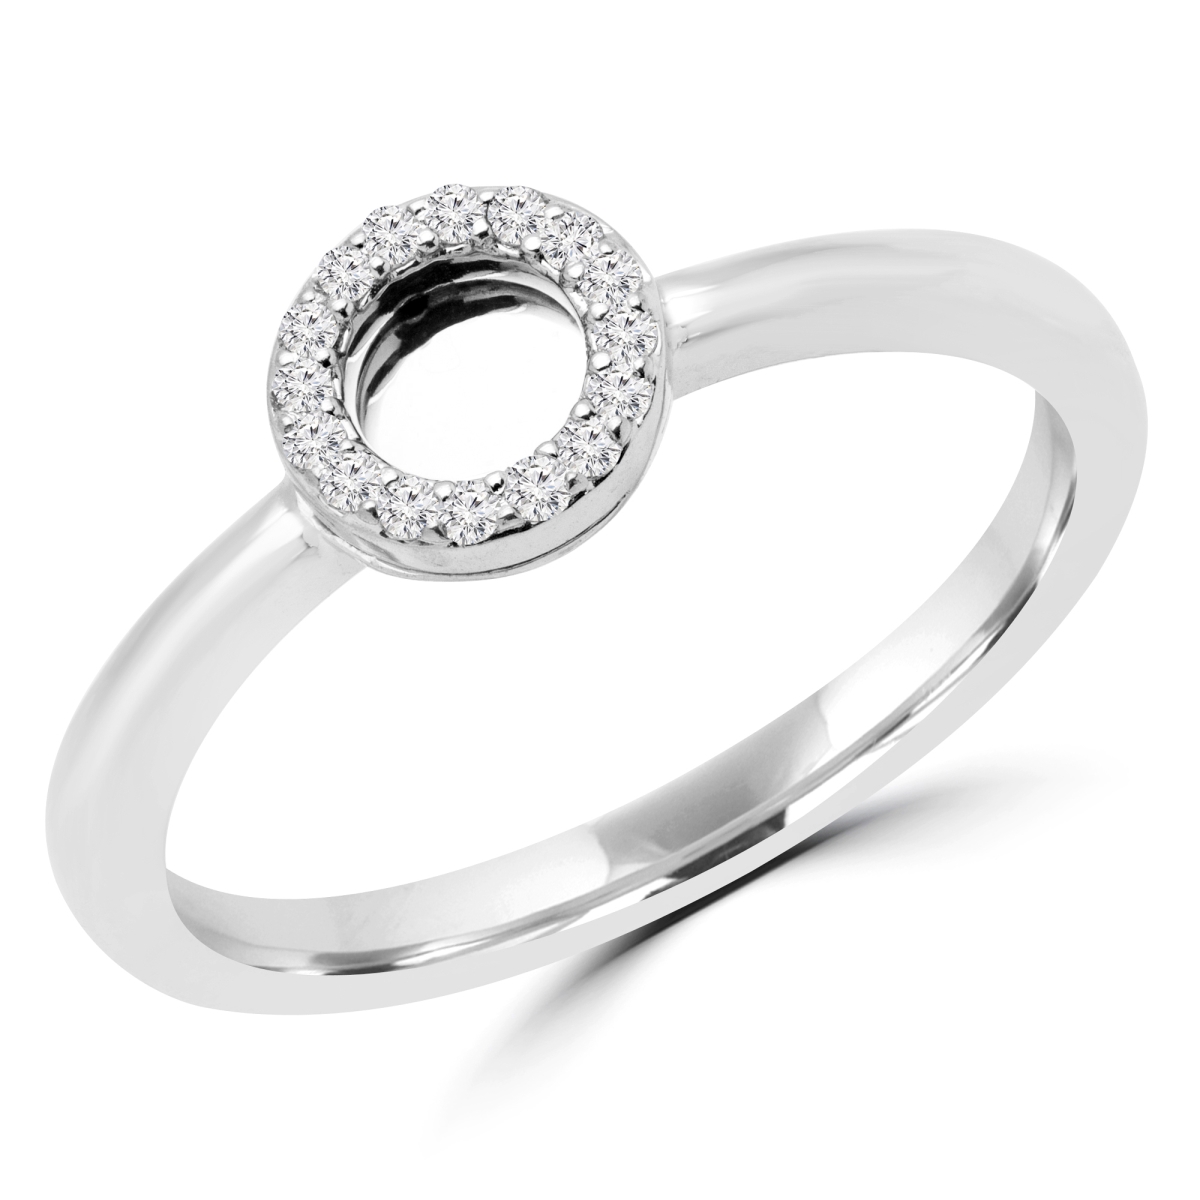 Picture of Majesty Diamonds MDR170066-3 0.1 CTW Round Diamond Cocktail Ring in 14K White Gold - Size 3